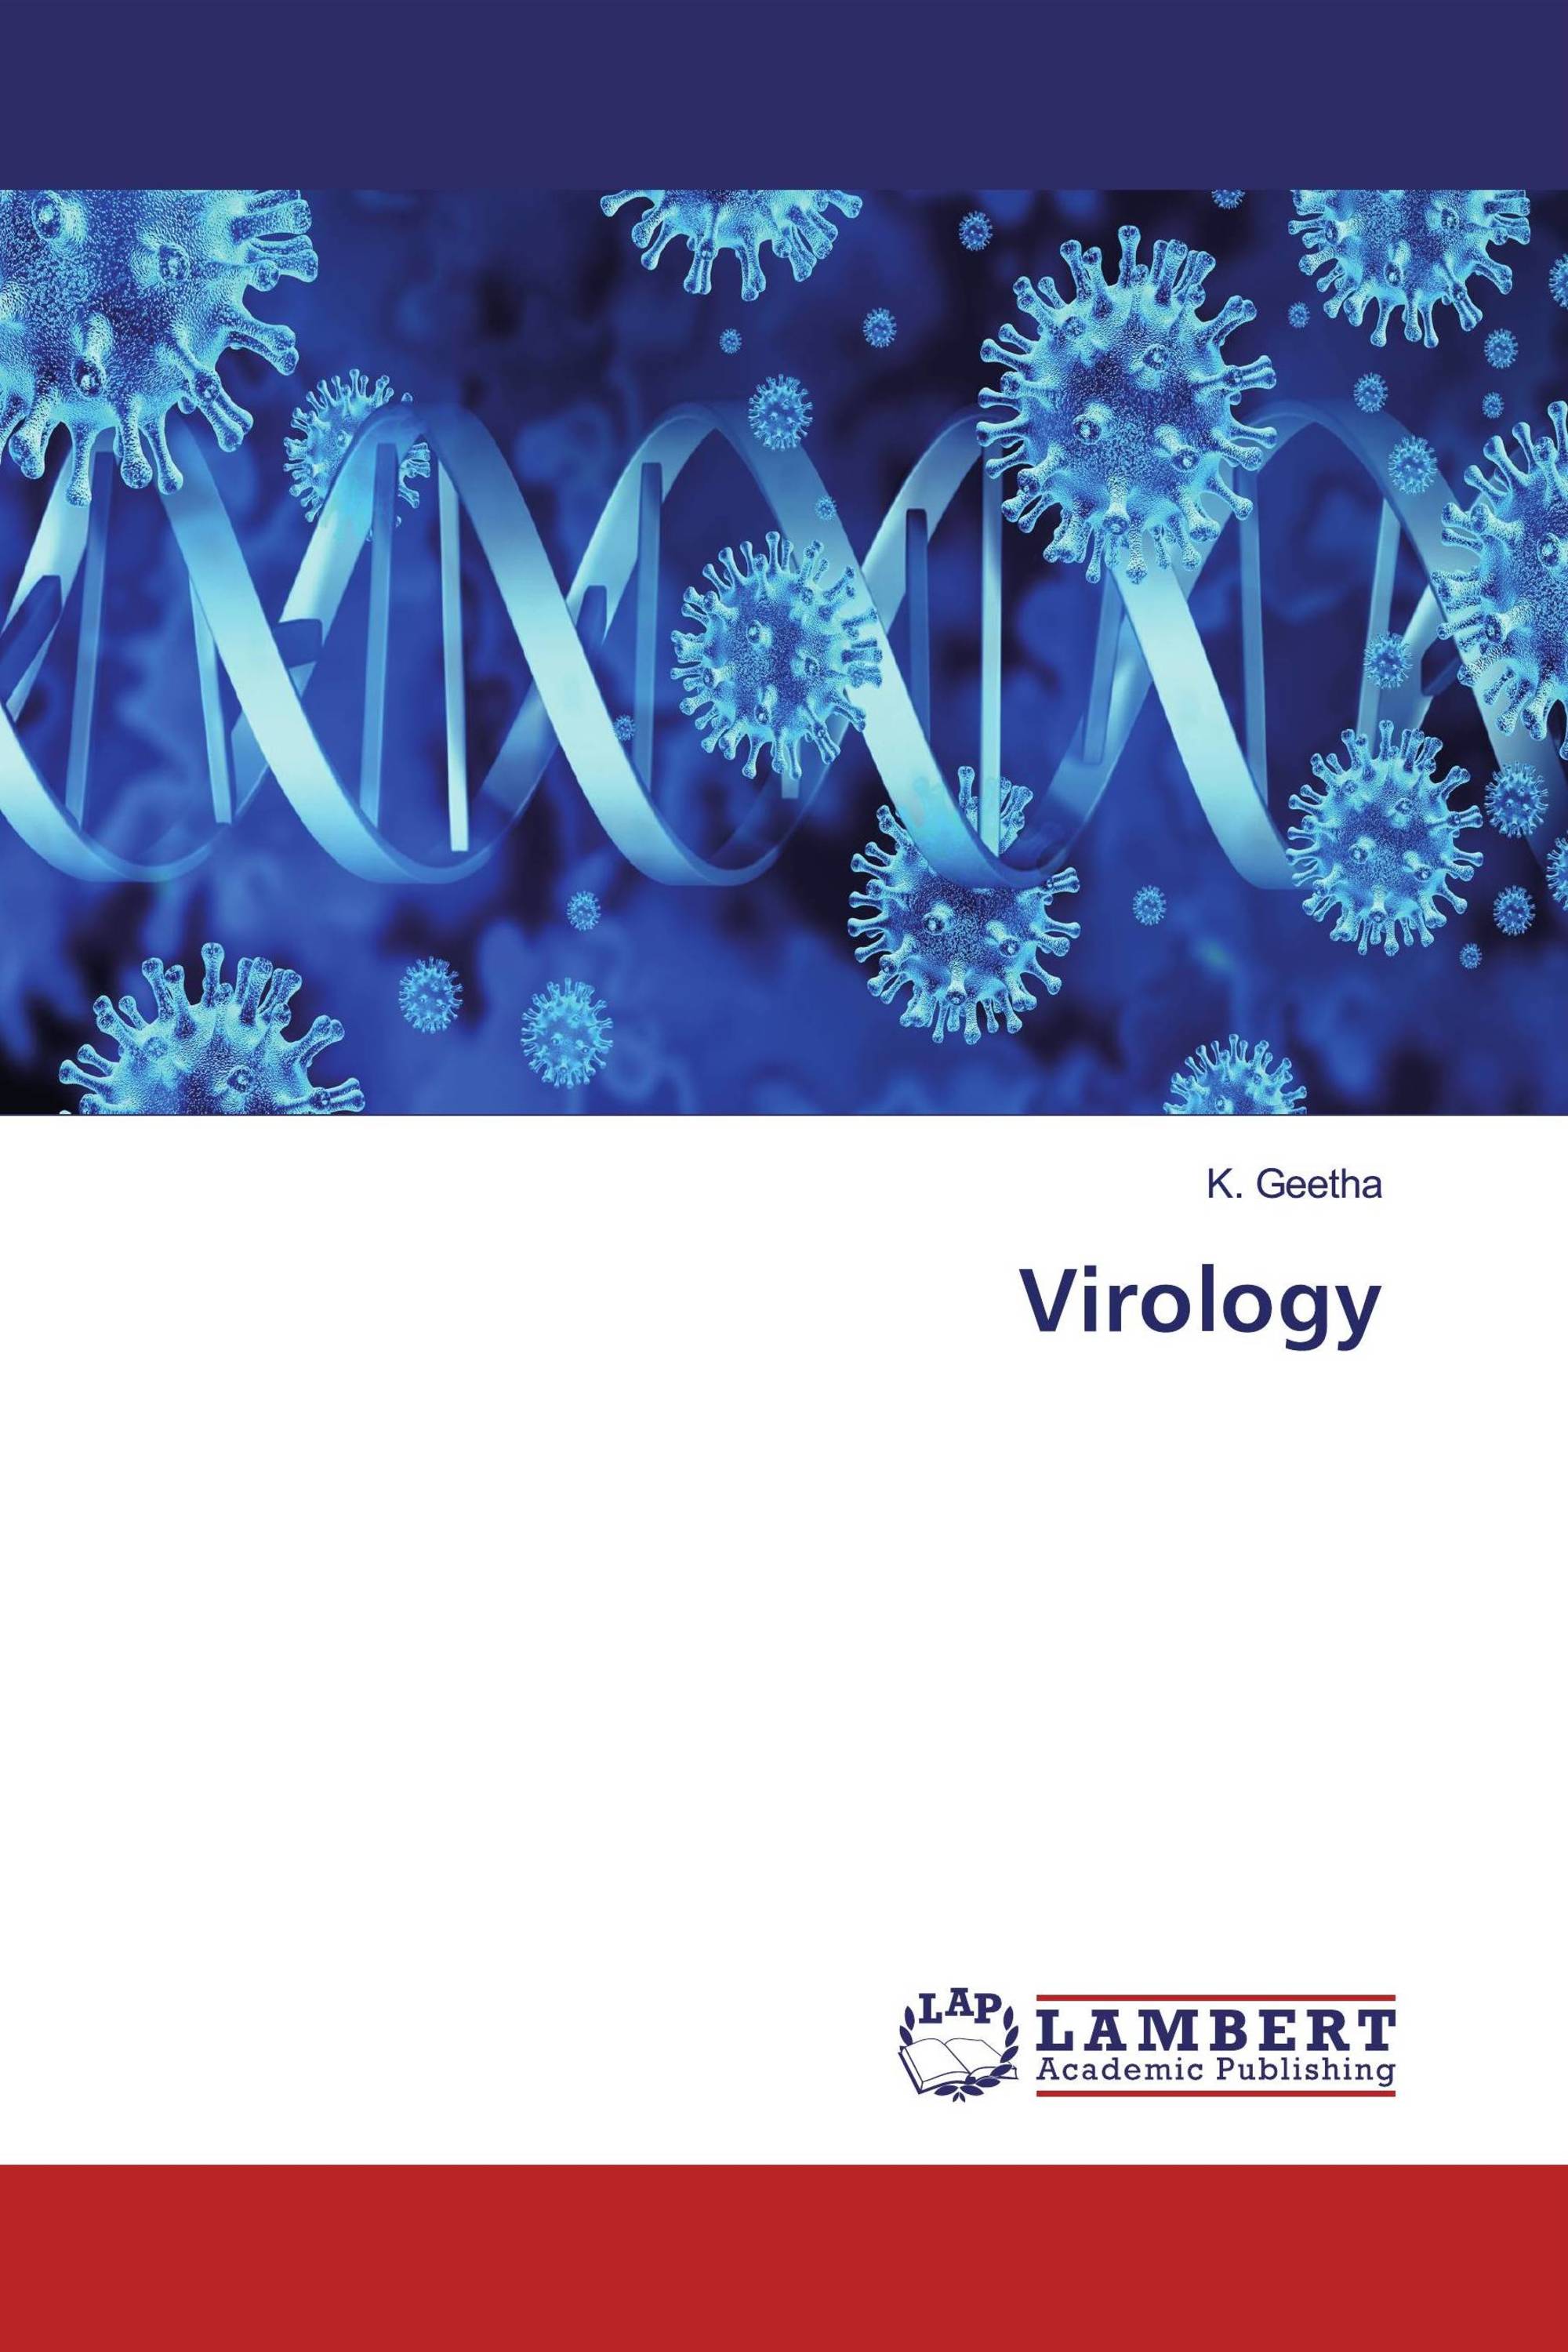 virology related thesis topics